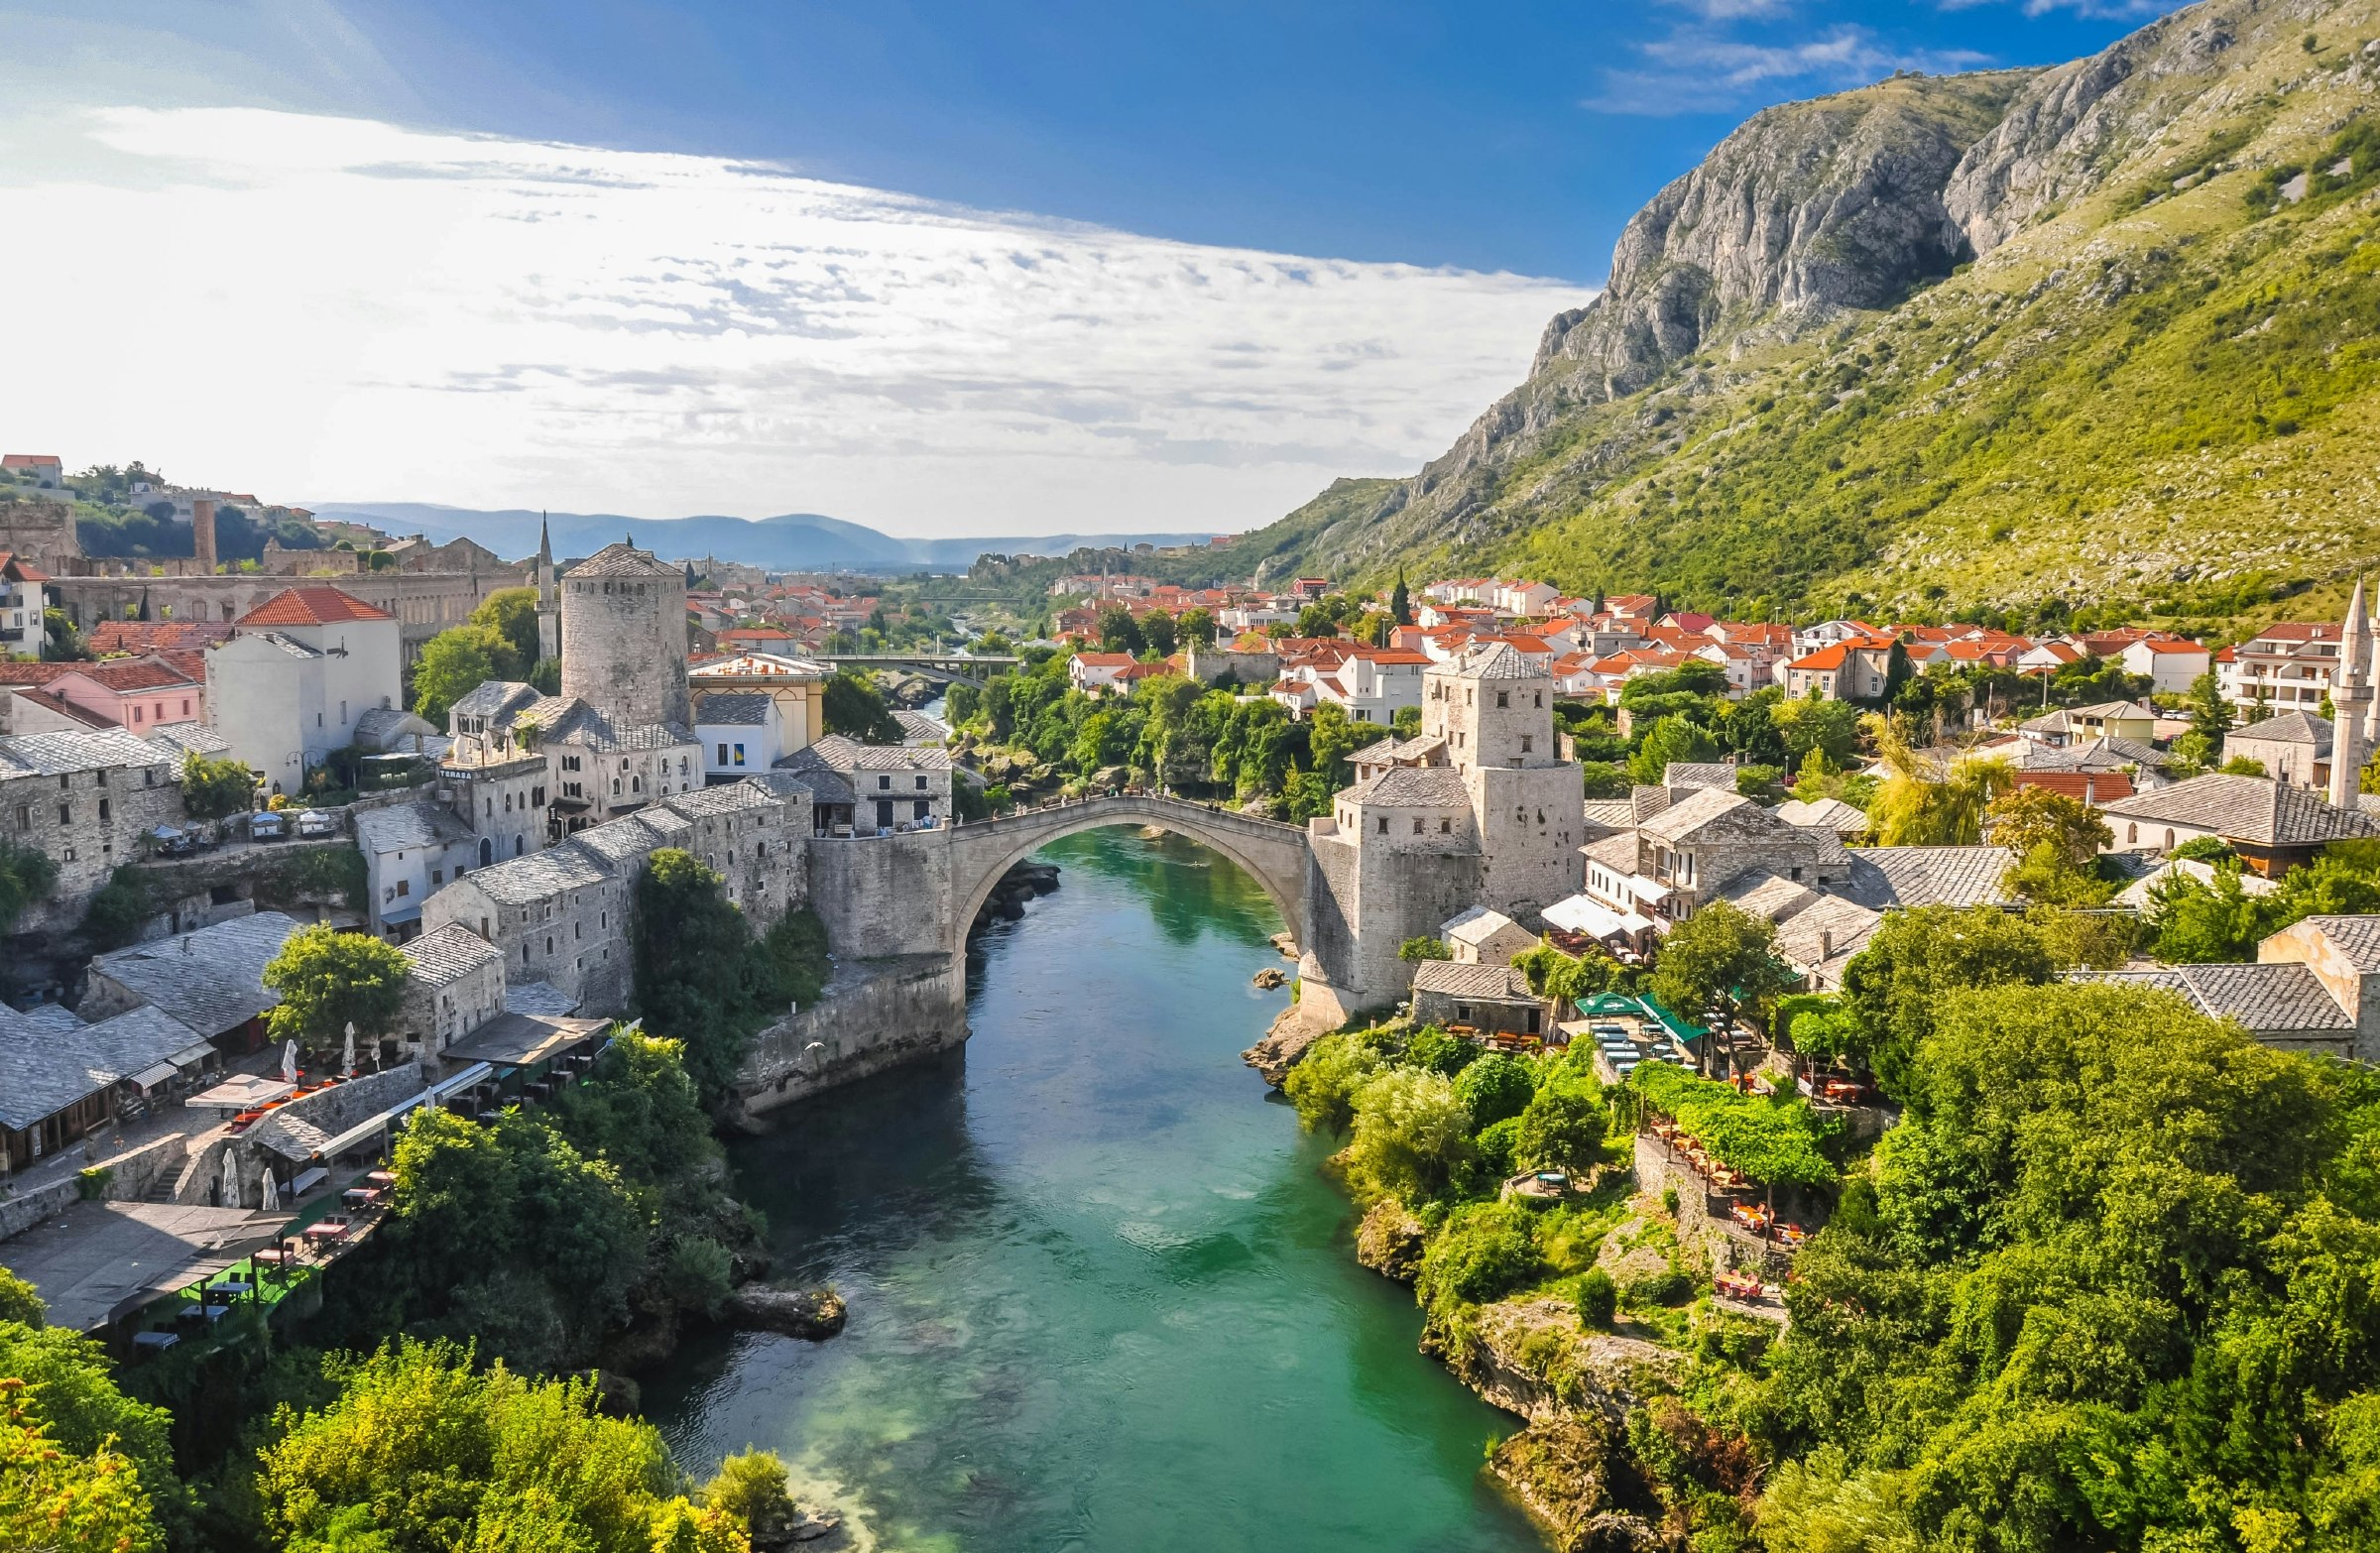 An aerial view of the city of Mostar in Bosnia and Hercegovina. The view shows the old bridge, which spans the river that runs through the city, and numerous white buildings surrounding it. In the background, green mountains are visible.